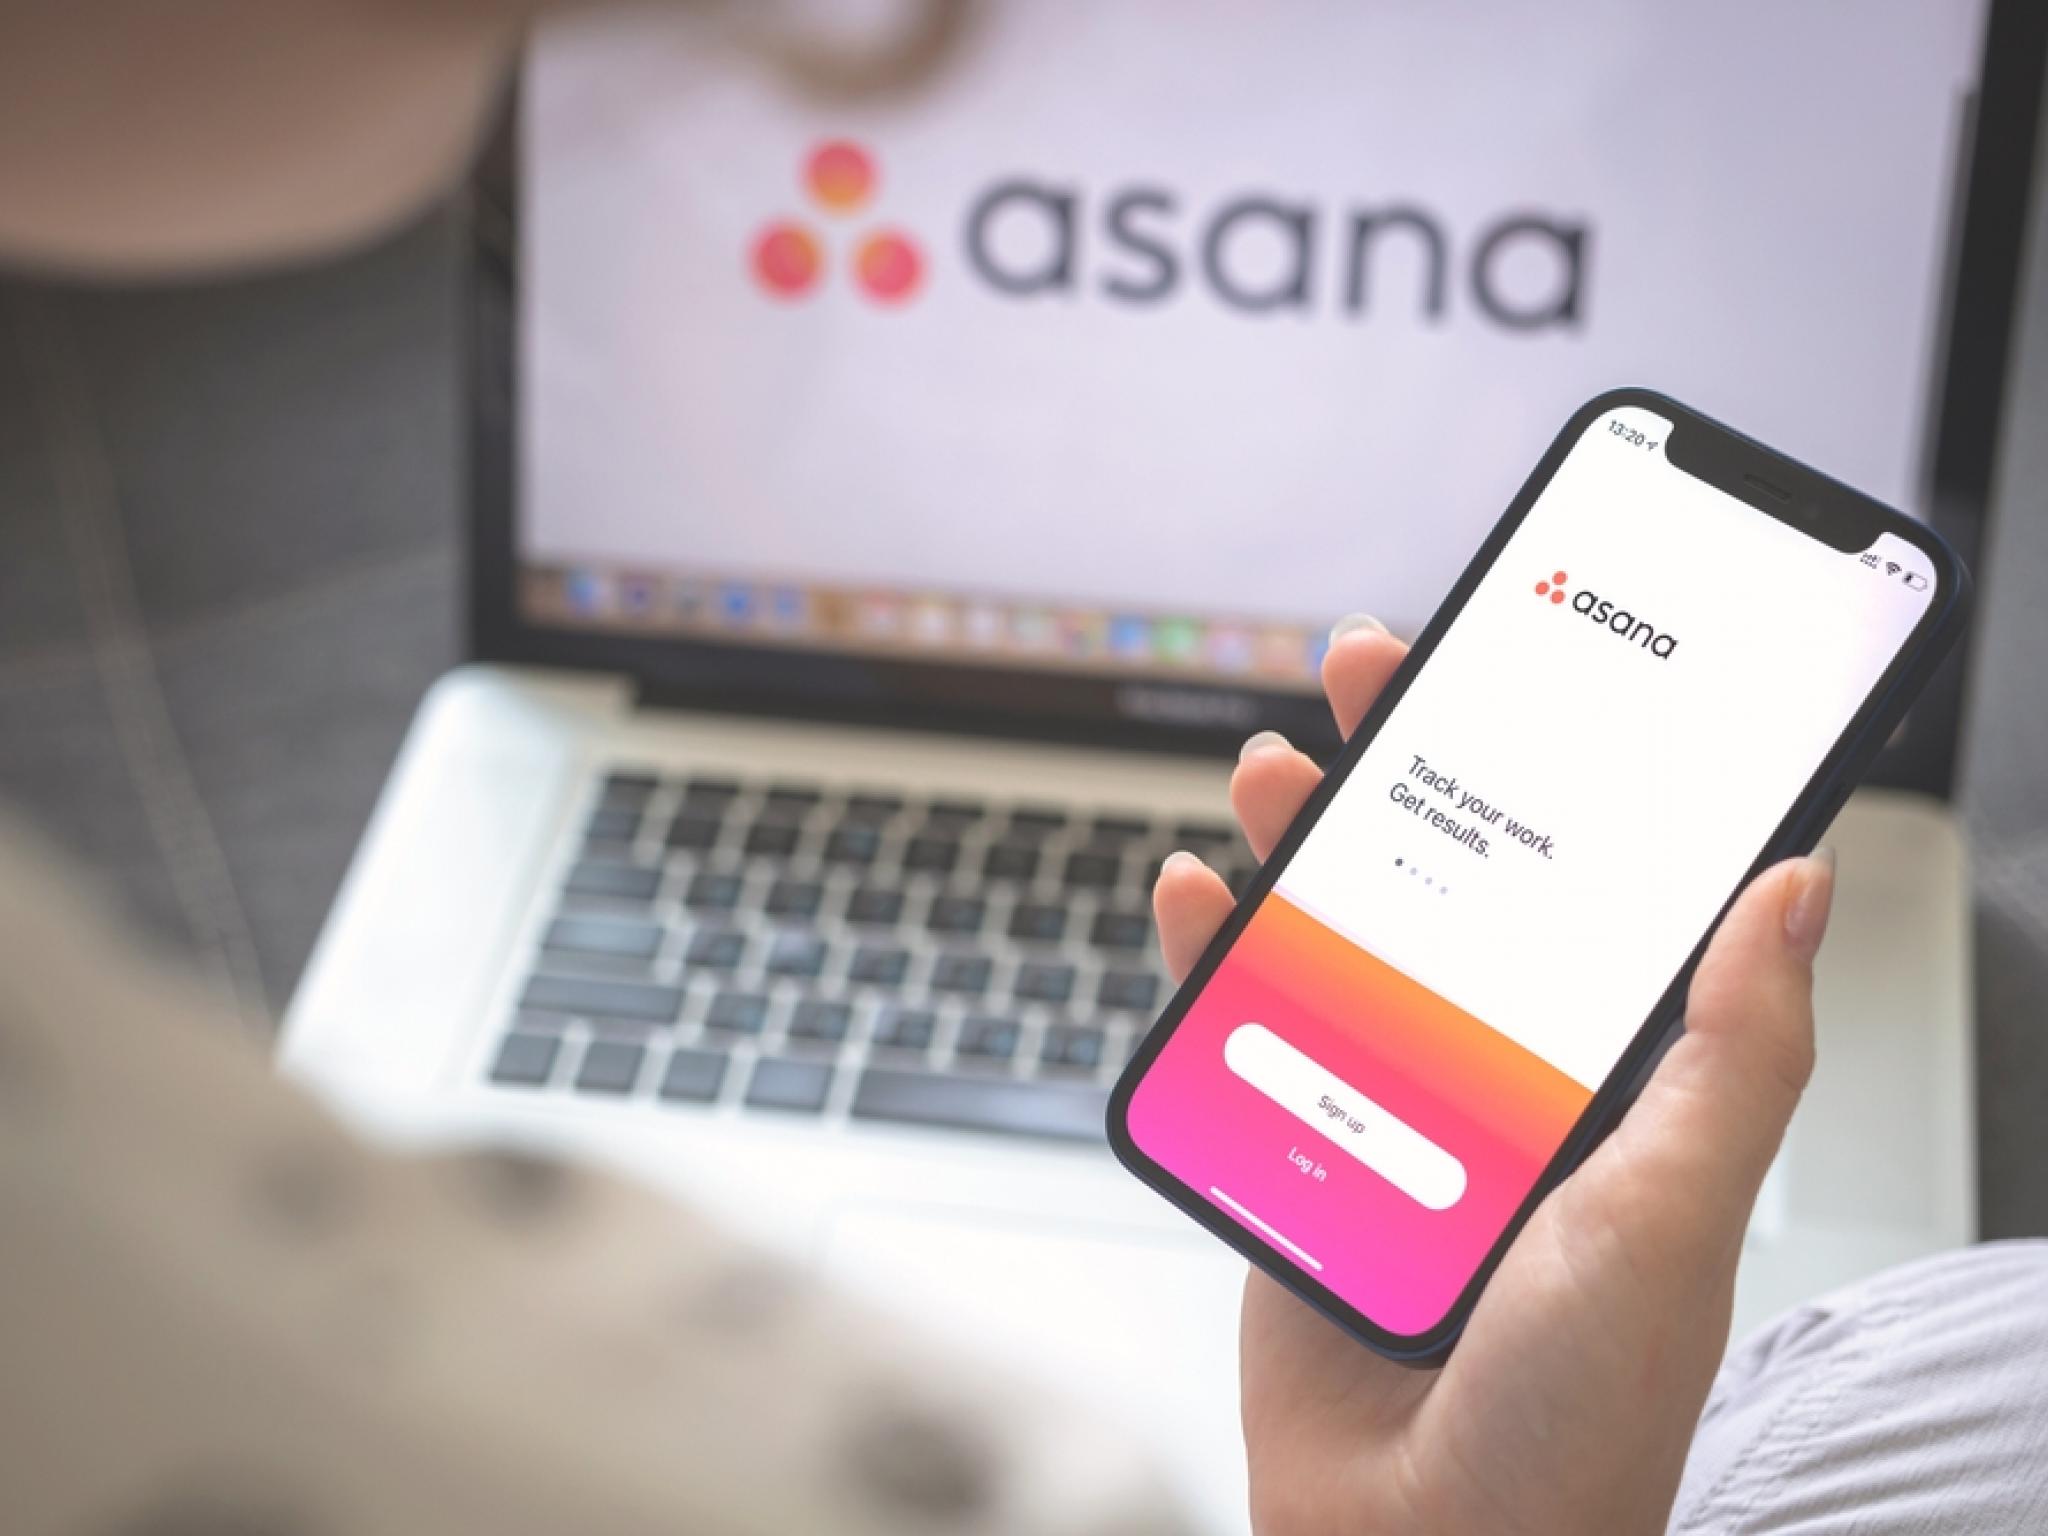  asana-analysts-cut-their-forecasts-after-q1-results 